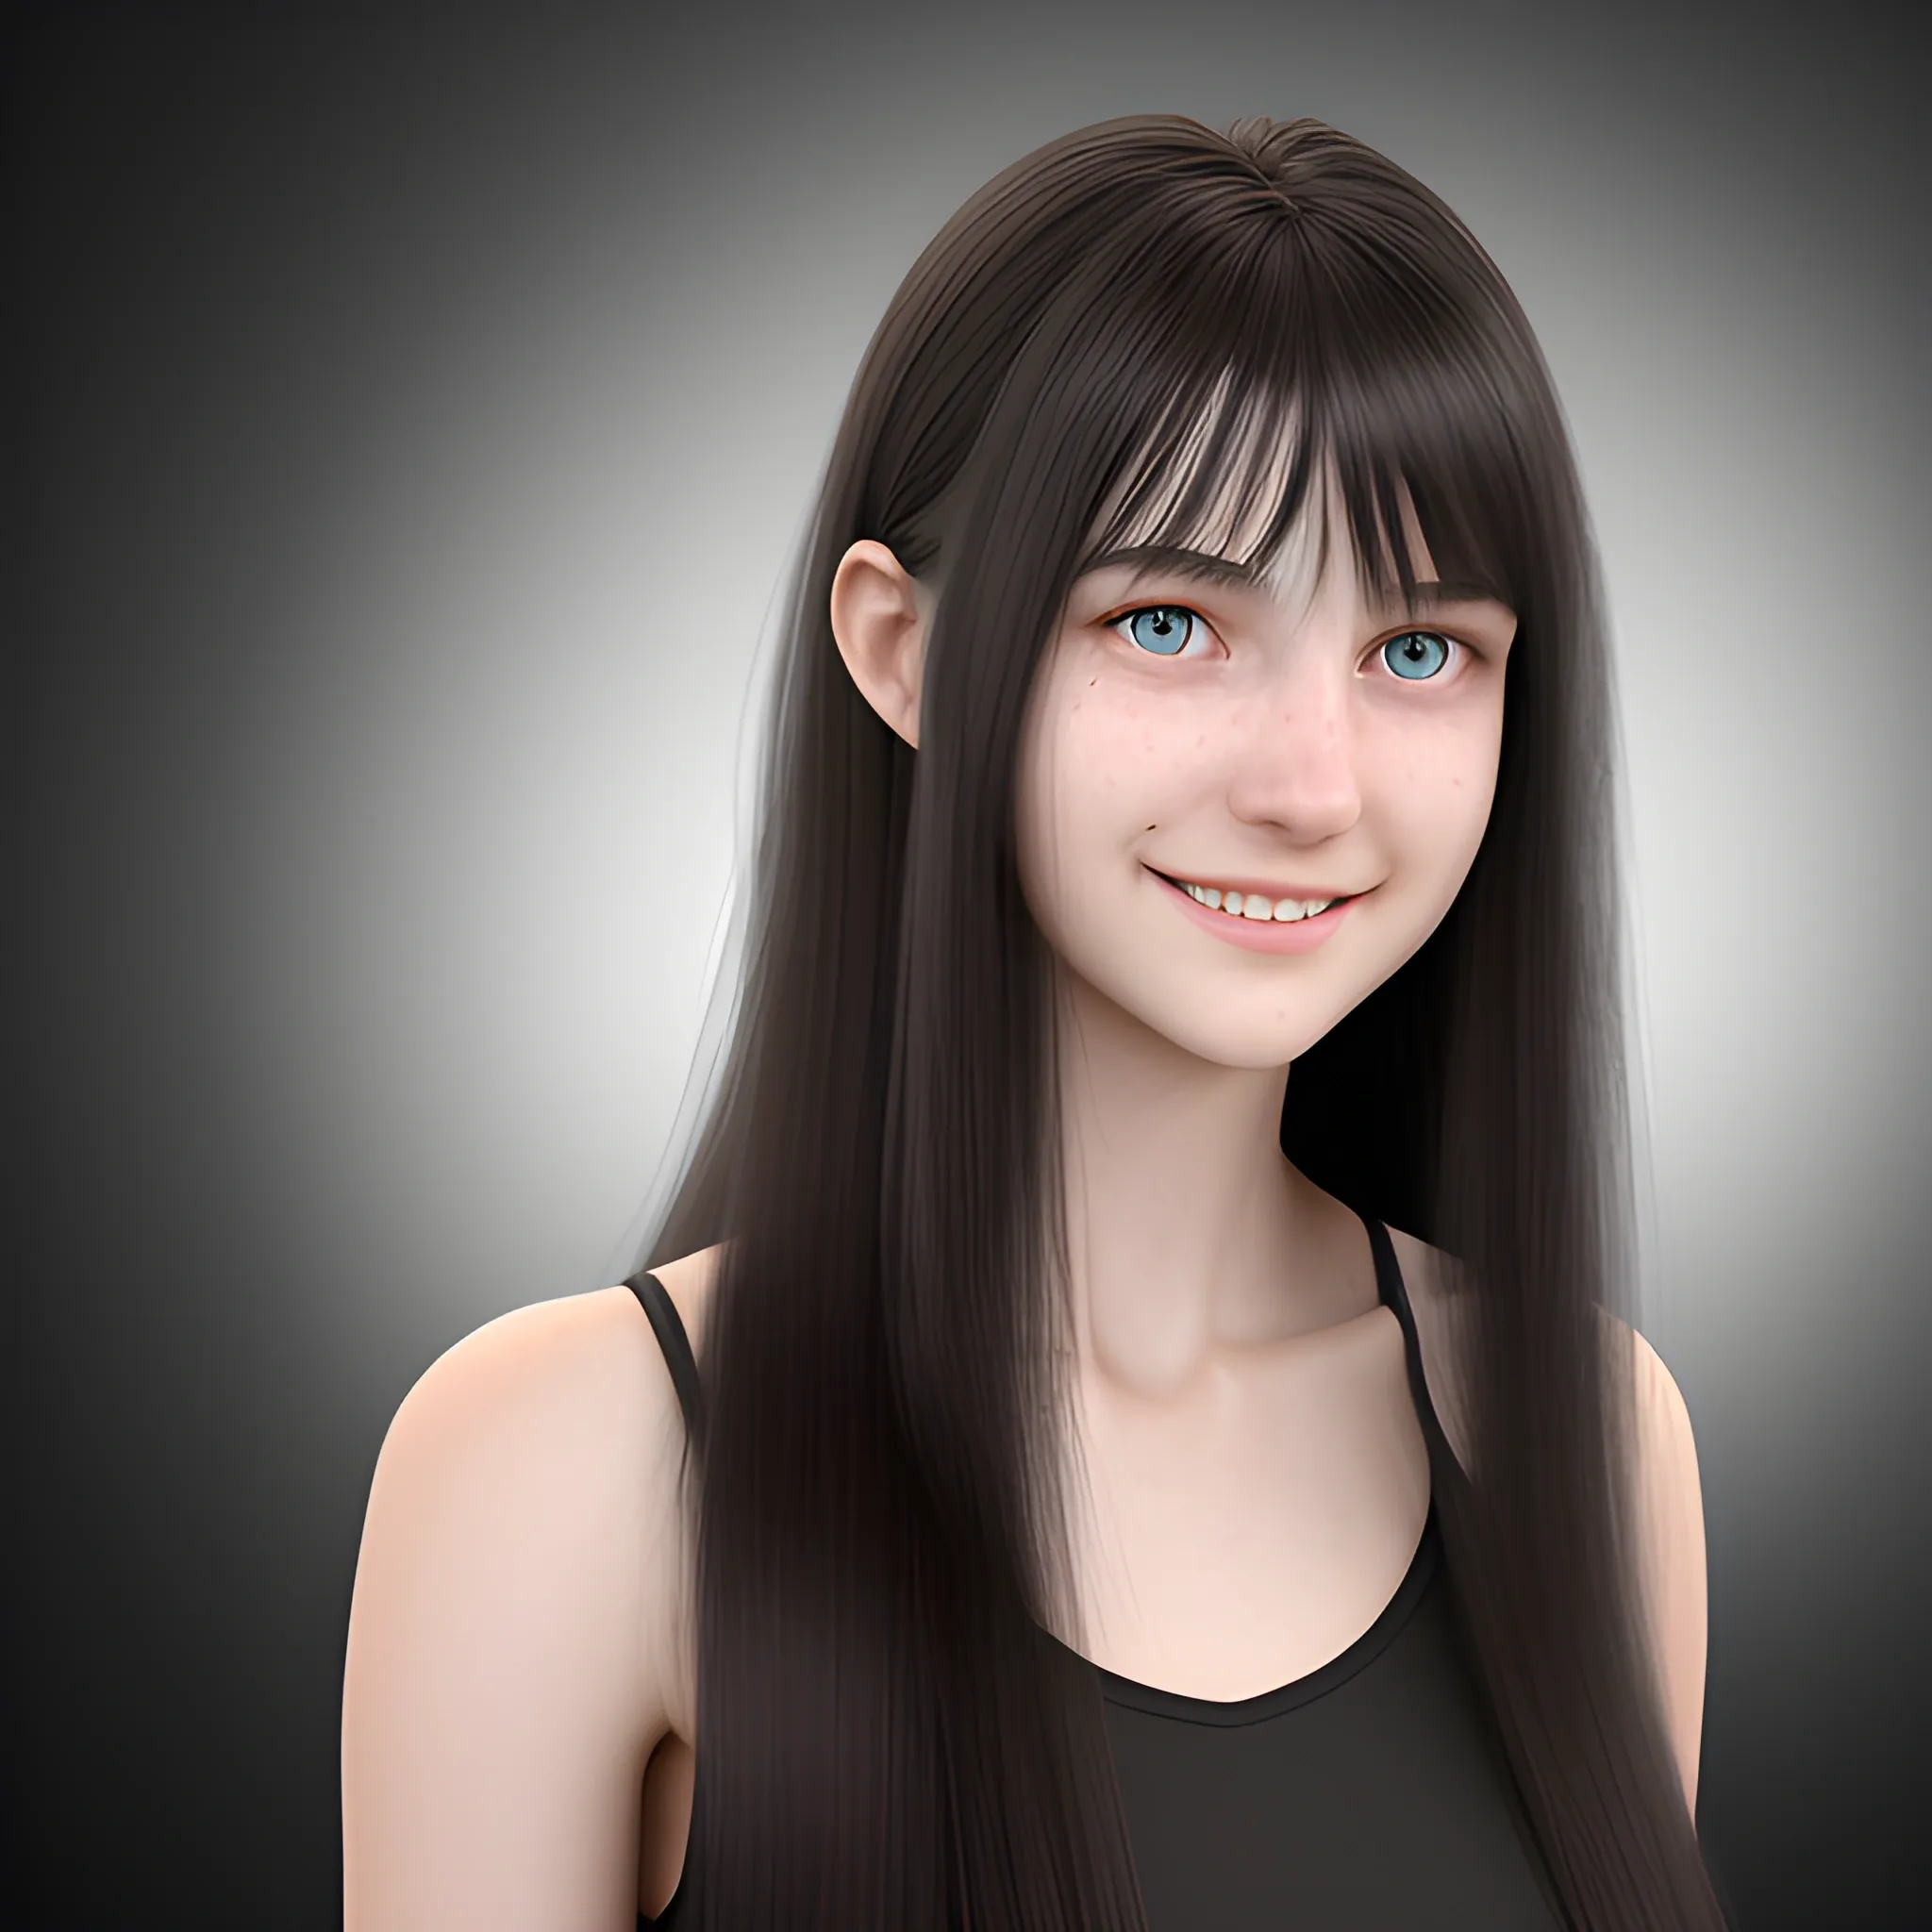  Photorealistic image of an 22 years old female in a full height photo, complemented by a subtle smile, captured with high detail. She has very long, straight, pitch black and thick hair. Backdrop of black studio background.